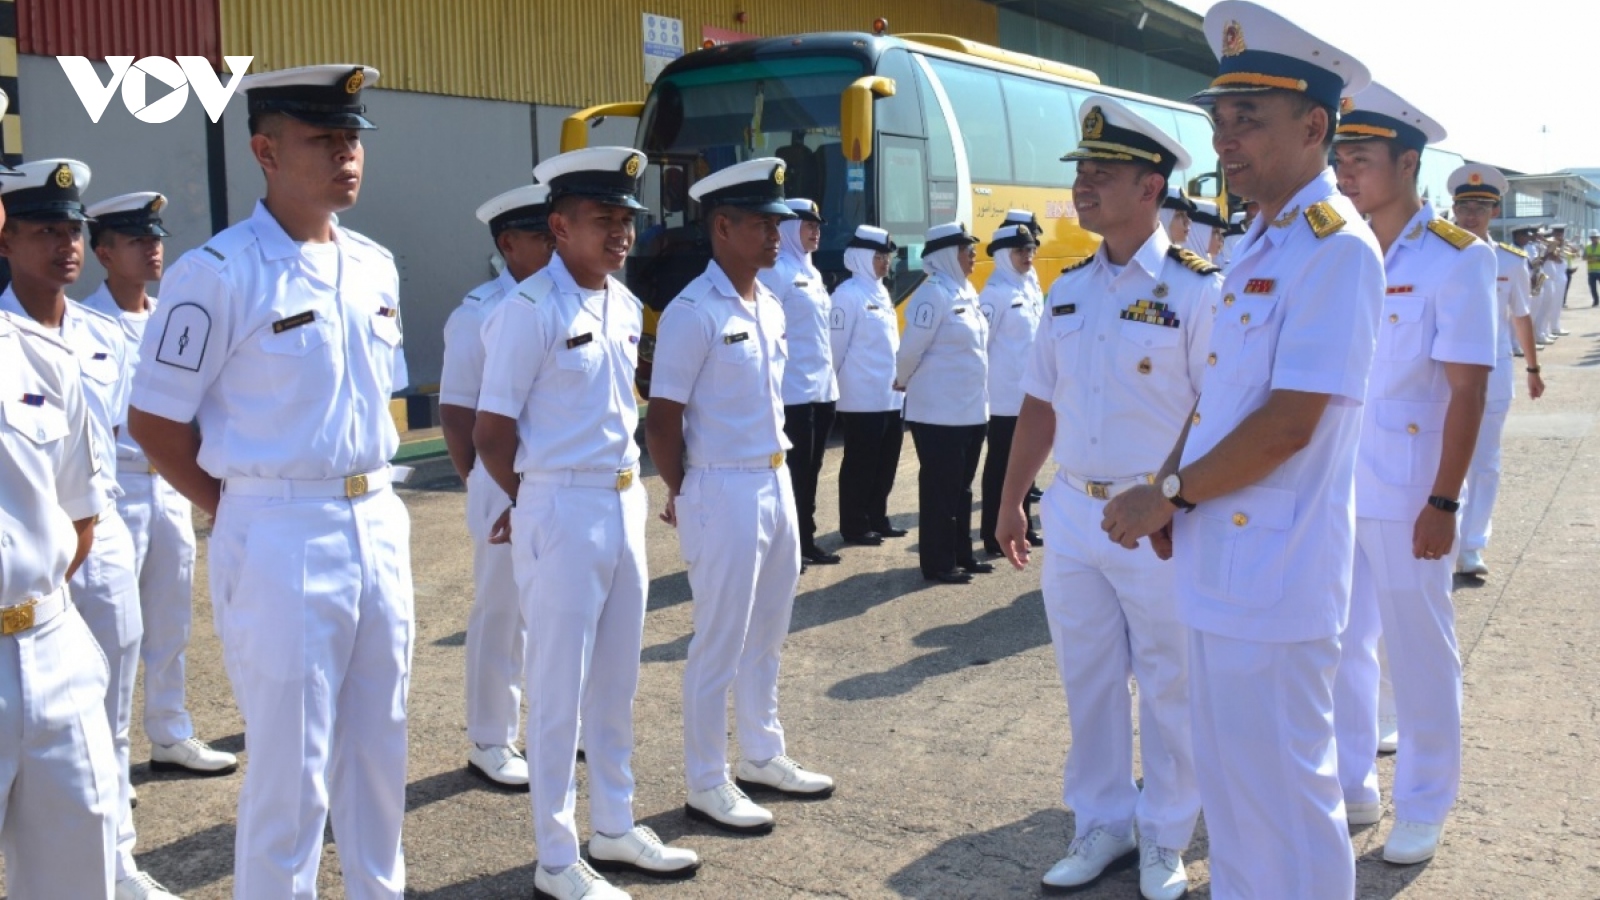 Navy vessel Le Quy Don calls at Brunei port for working visit